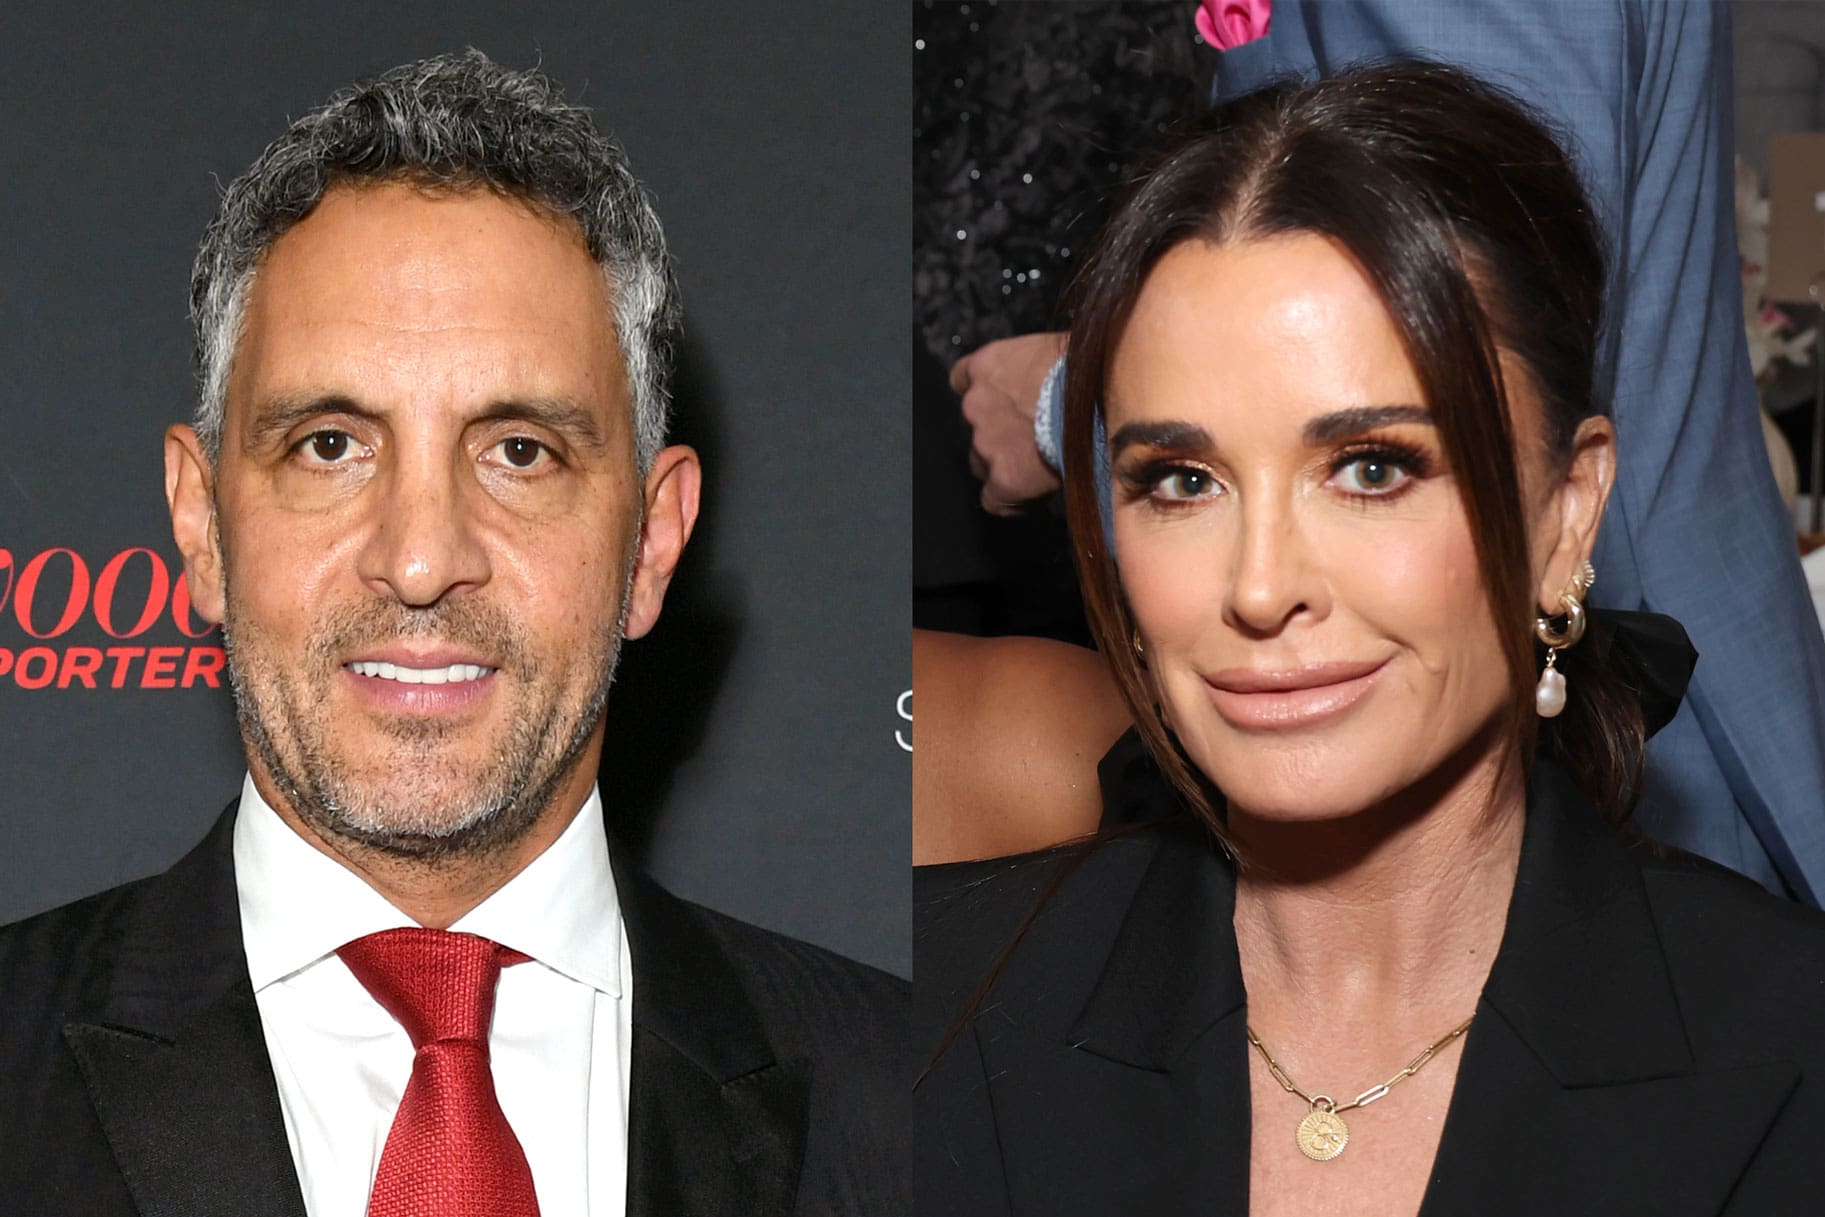 Kyle Richards Admits She and Mauricio Umansky ‘Need Help’: I Fear We’re ‘Not Going to End Up Together’